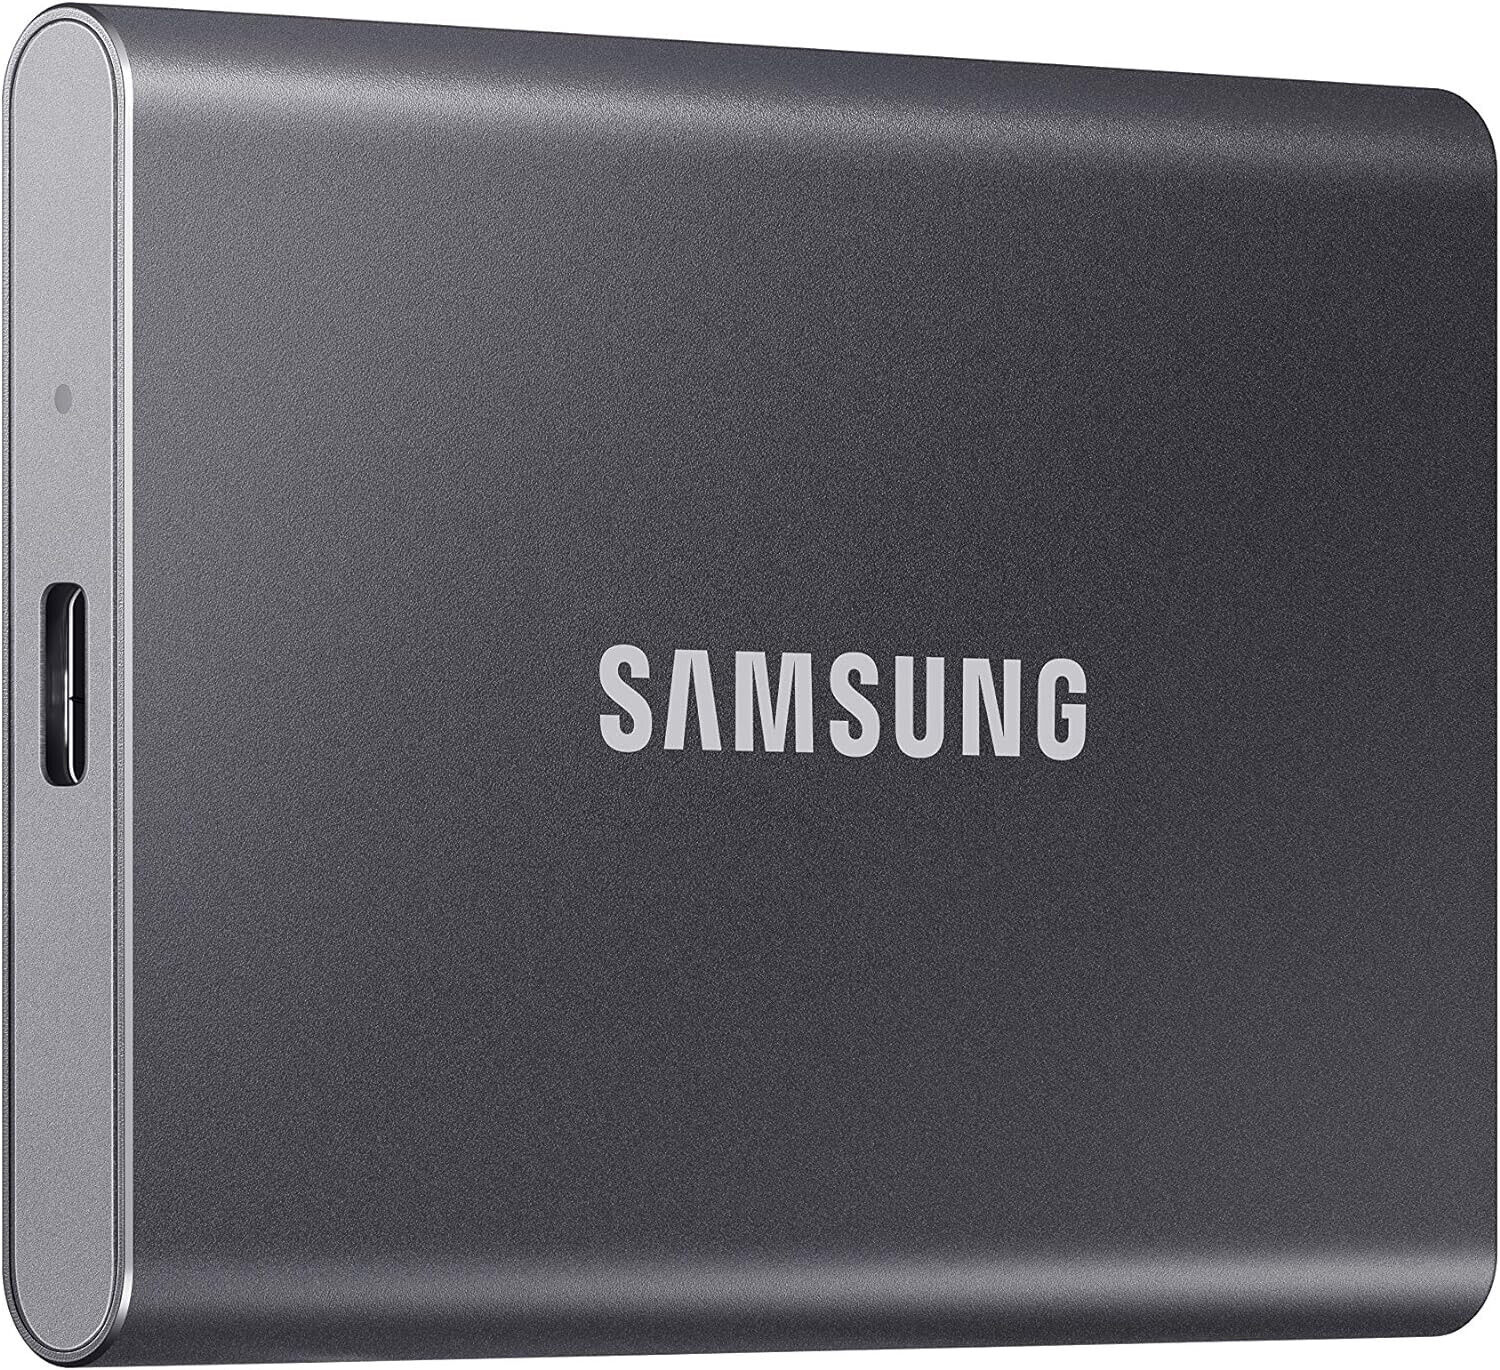 Samsung T7 Portable External Solid State Drive 1TB Up to 1050MB/s, USB 3.2 Gen 2